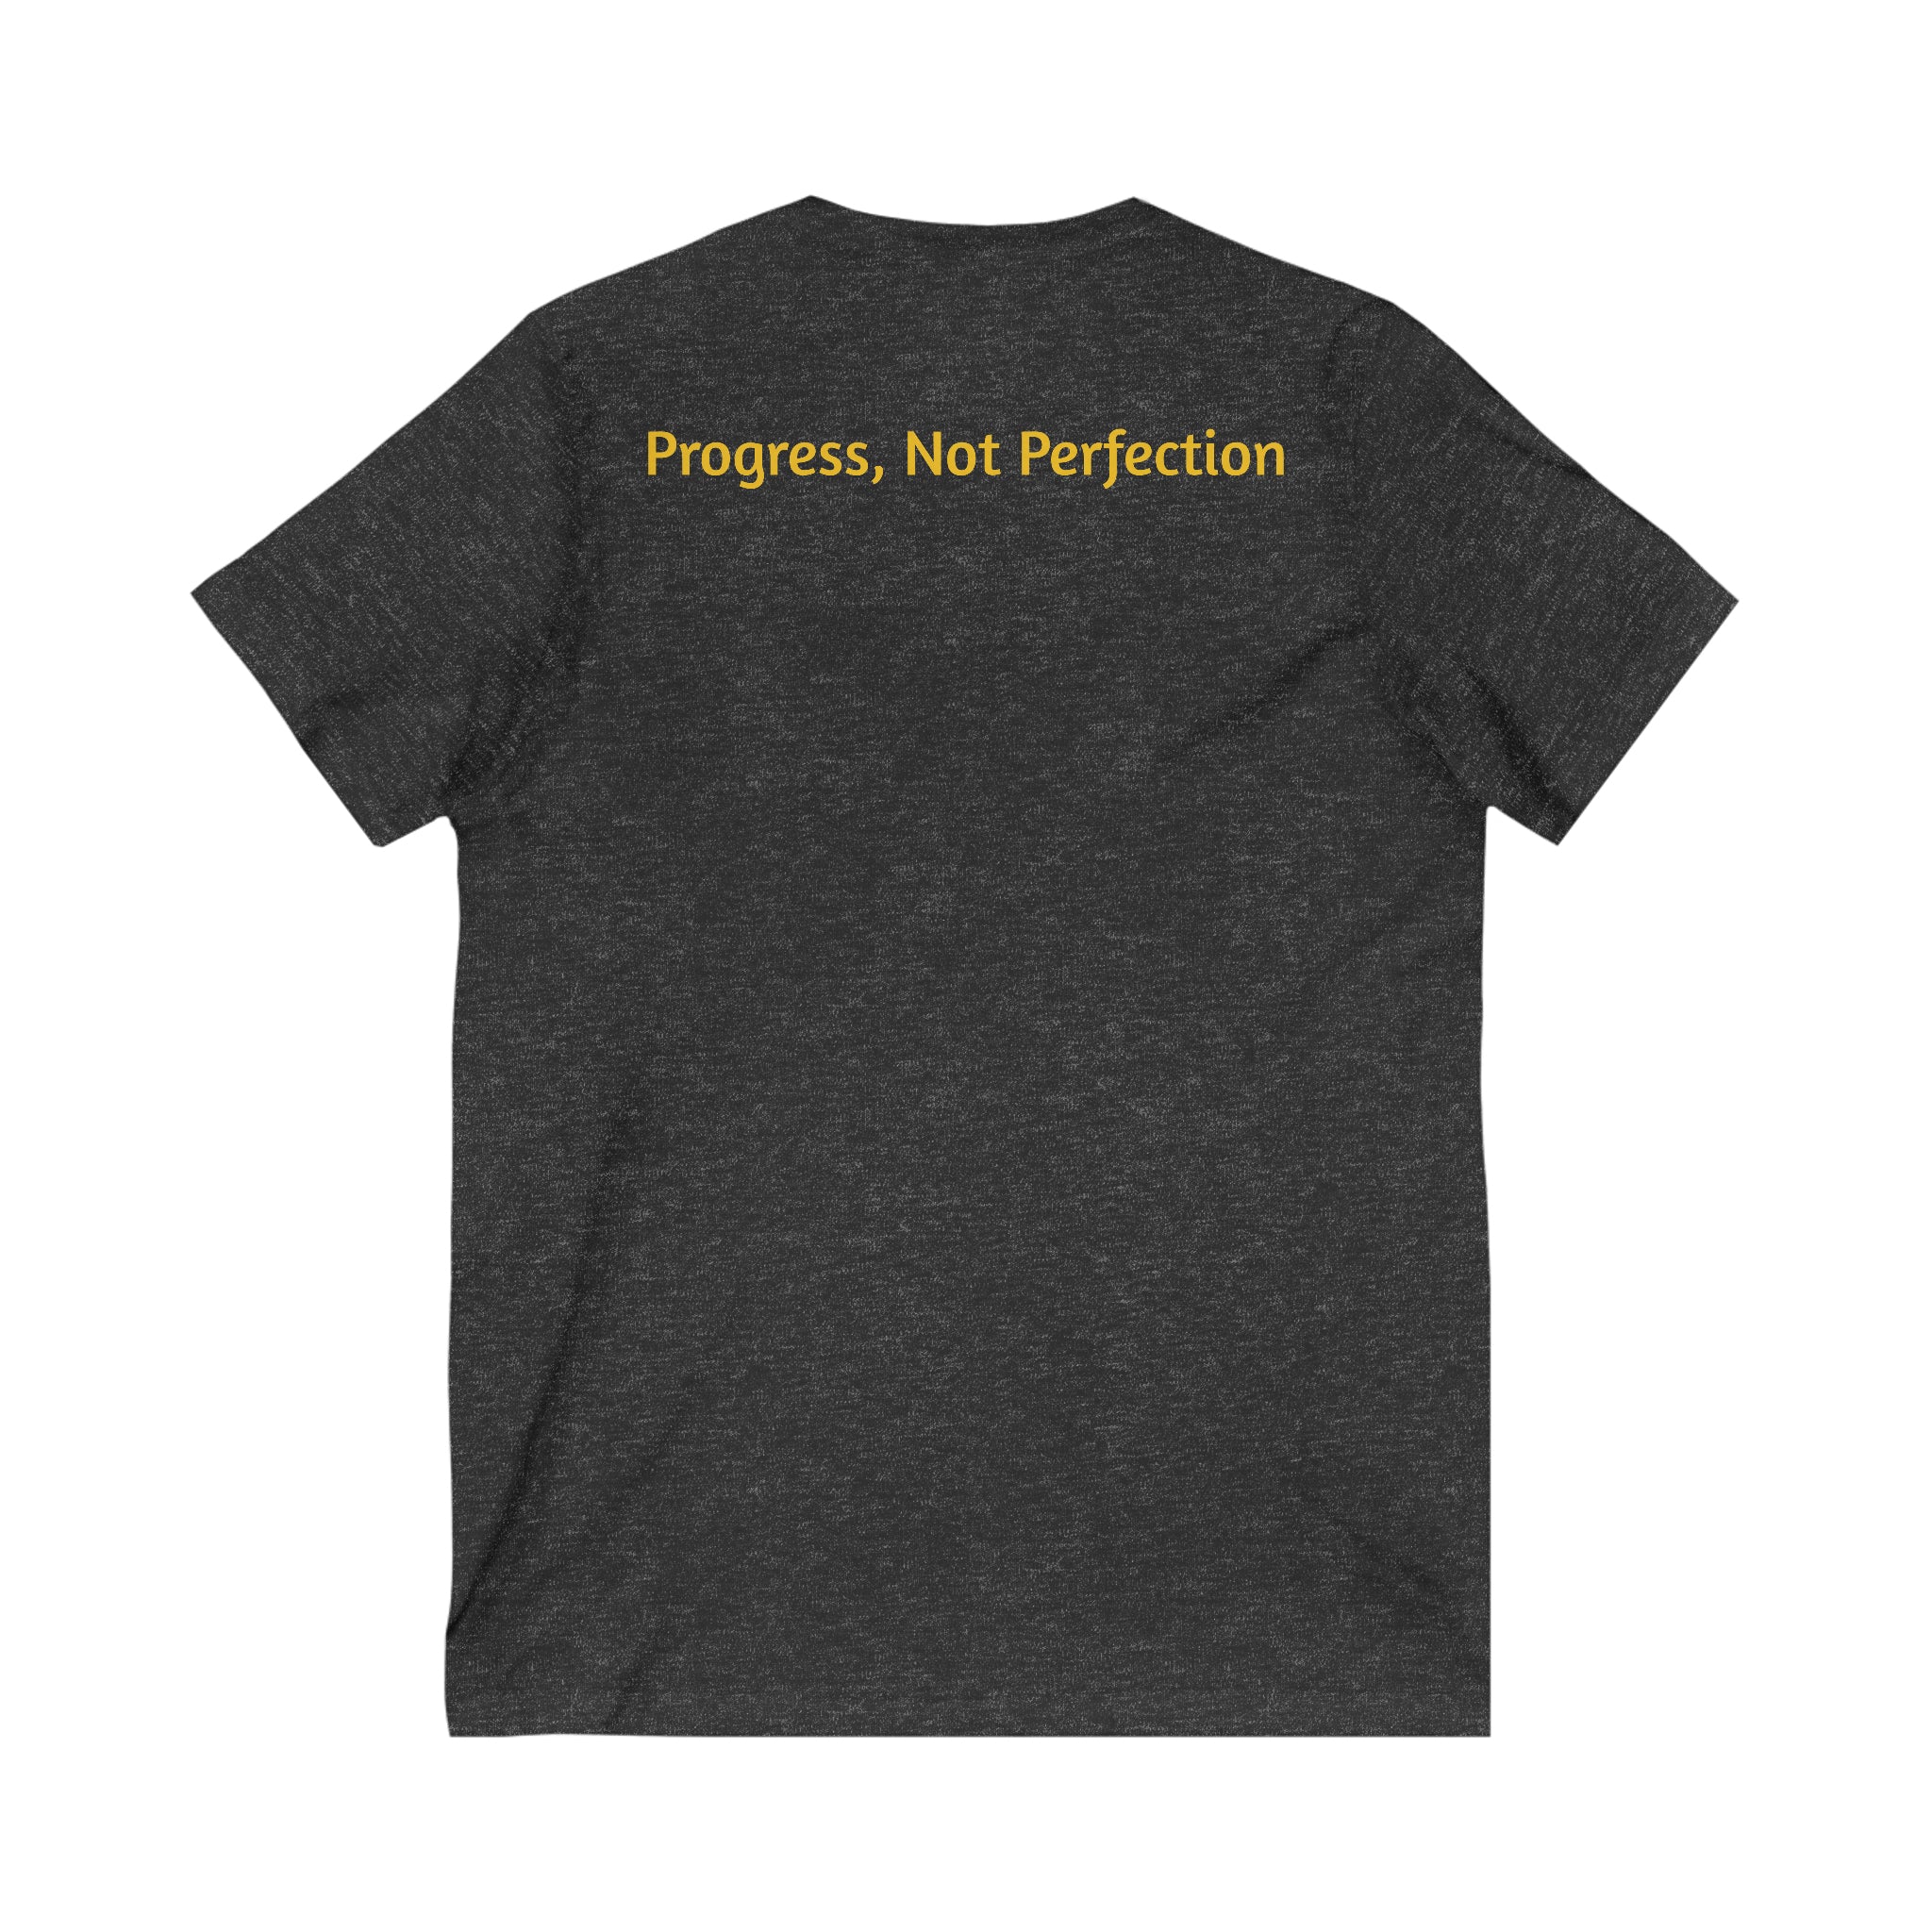 Progress, not perfection V-Neck T-Shirt Dark Grey Heather Athleisure Wear Casual Hoodie Comfort Hoodie Cozy Hoodie Graphic Hoodie Hooded Sweatshirt Hoodie Men's Hoodie Pullover Hoodie Women's Hoodie V-neck 8226035755063137951_2048_847aa186-4a72-4a84-a069-84957e391107 Printify